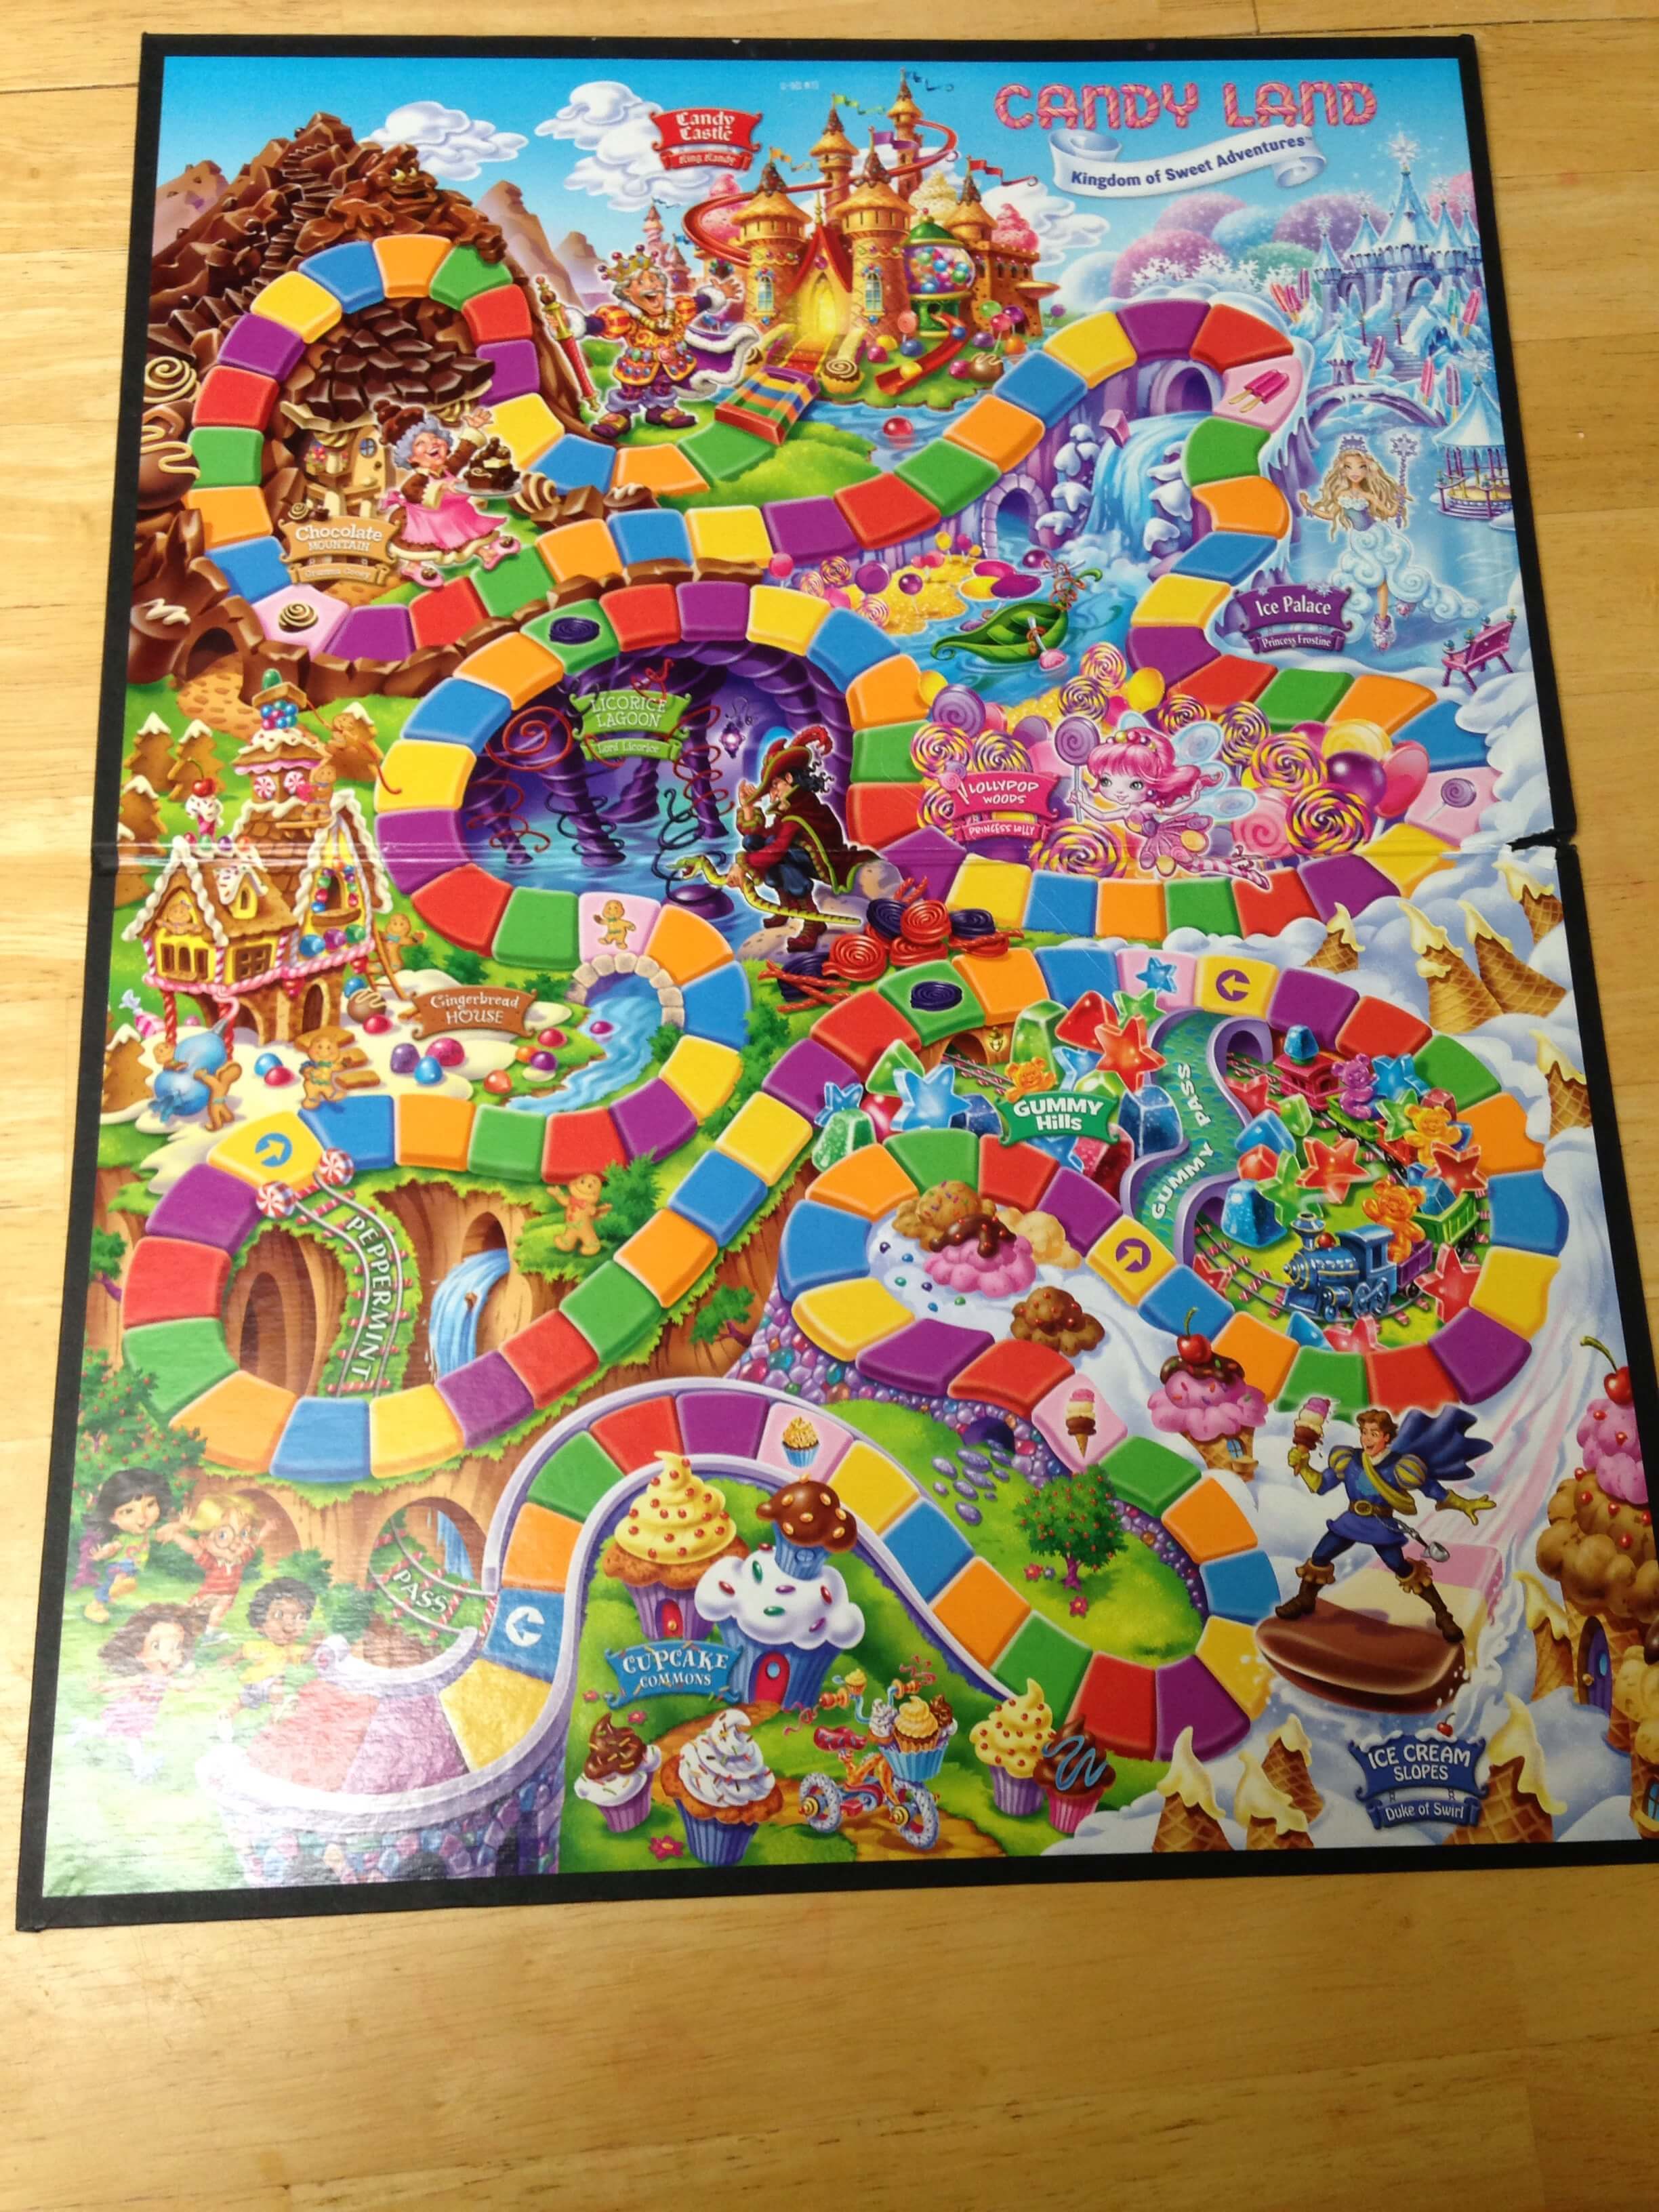 The game board for Candy Land, showing all spaces